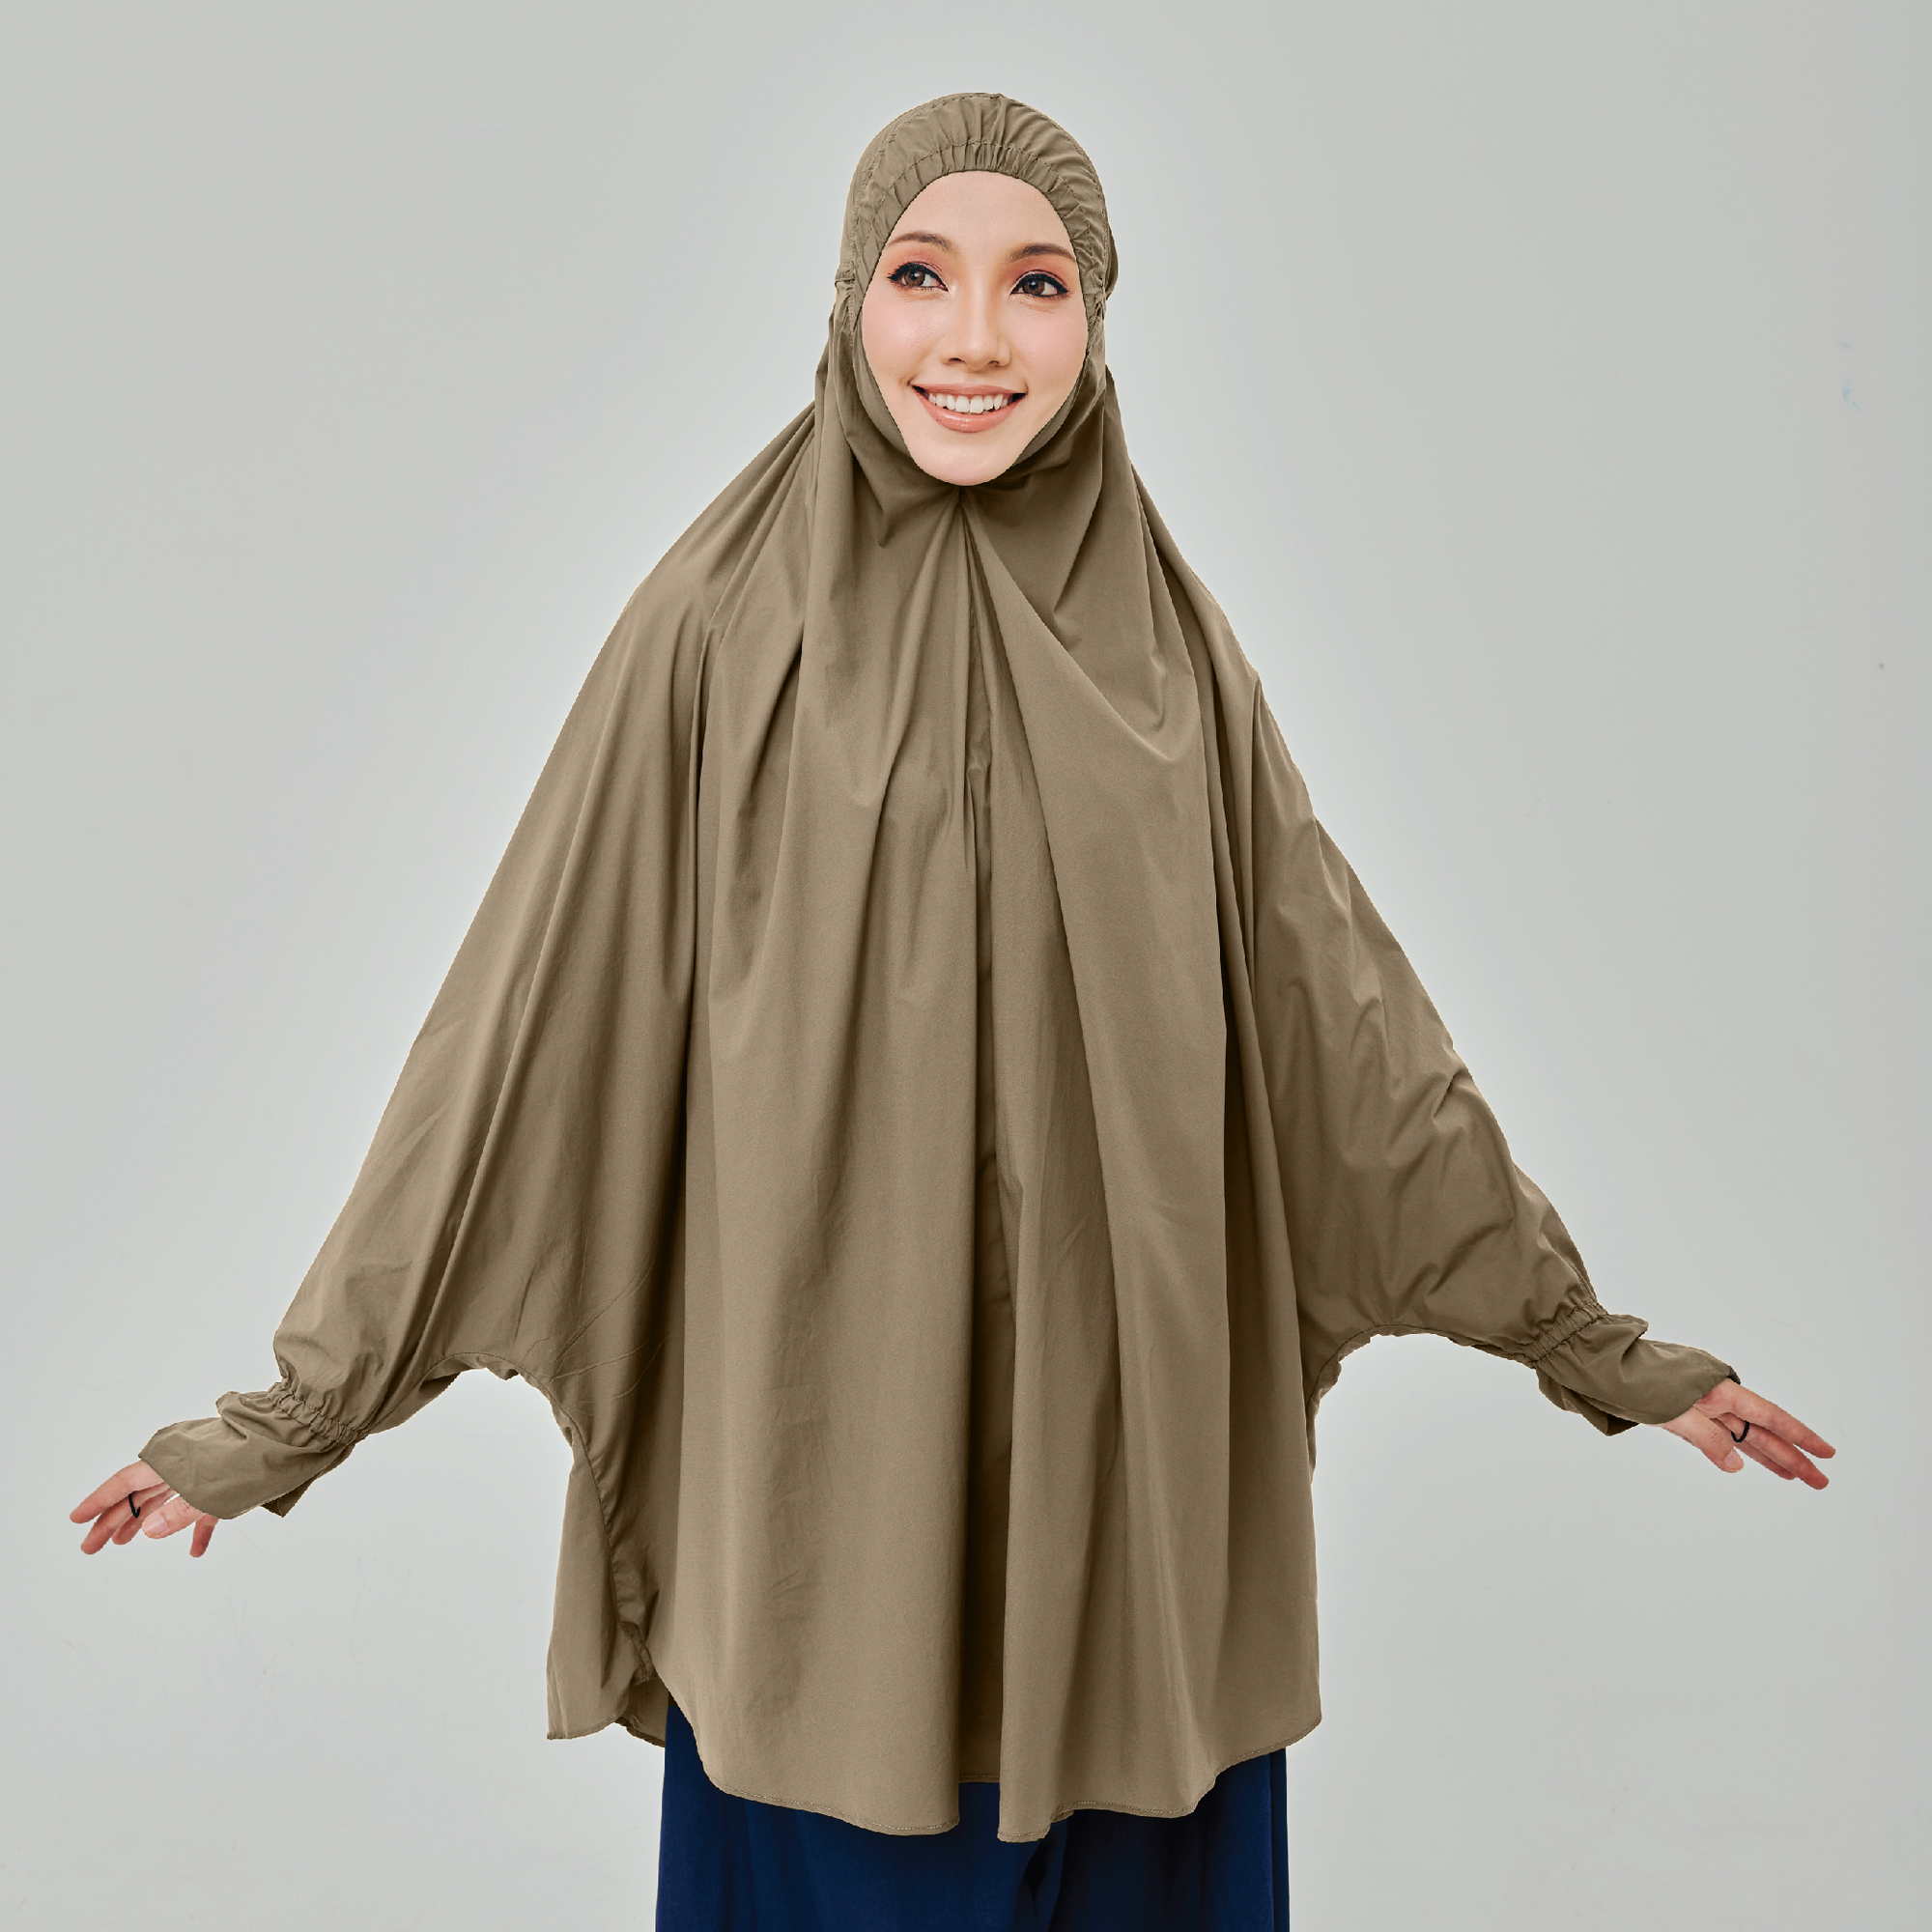 On-The-Go Prayerwear - Marisa Sleeved in Walnut (Top only with Sleeve)